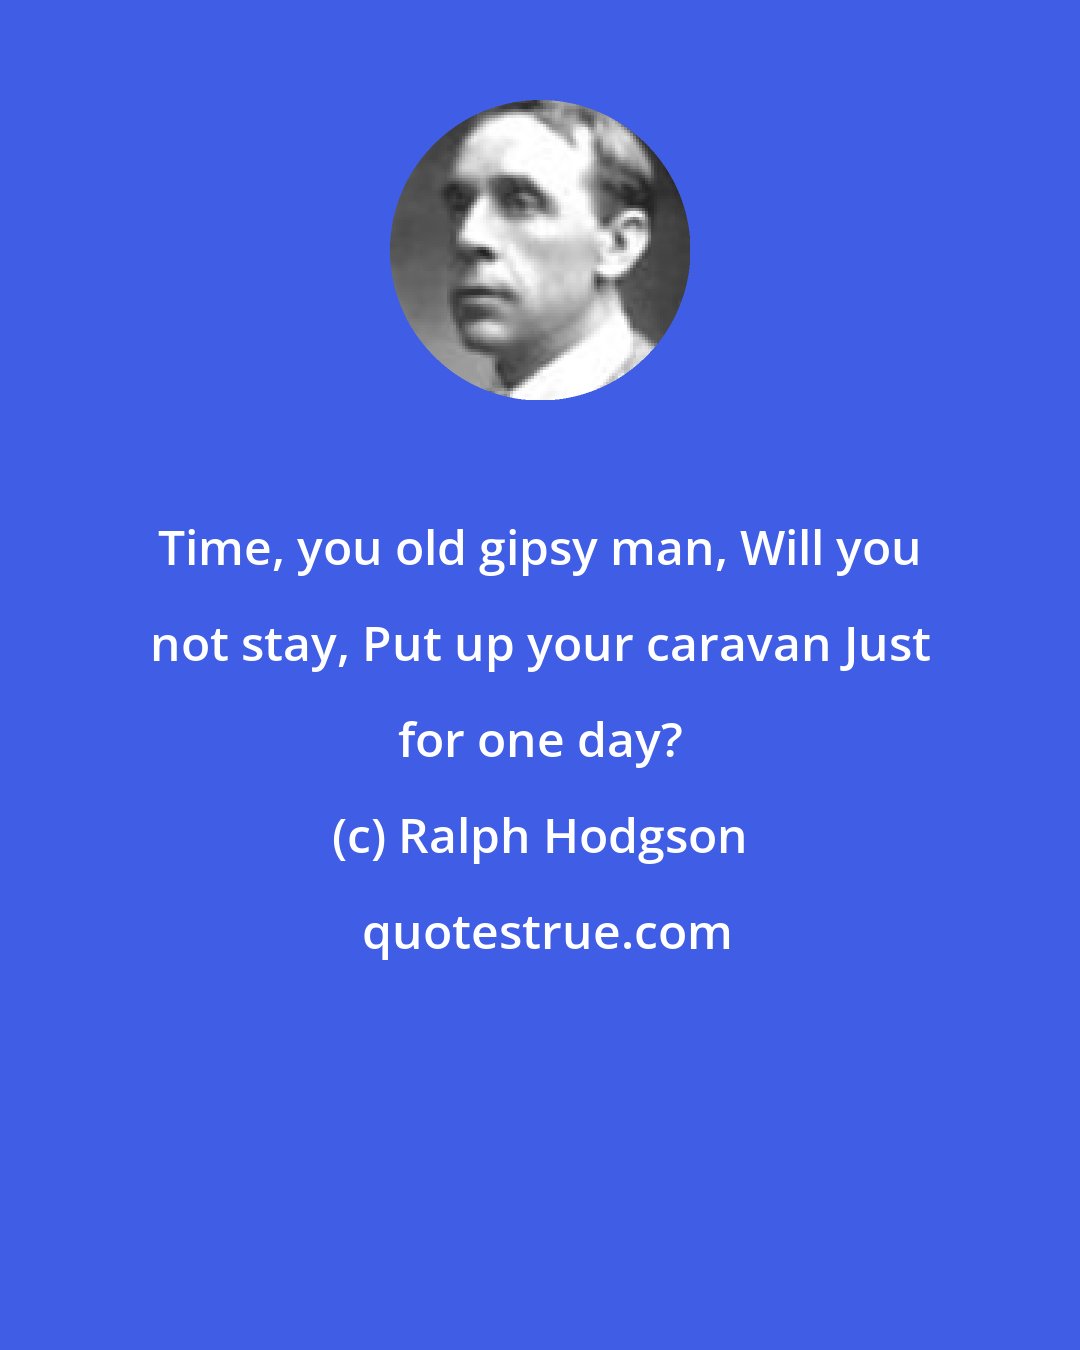 Ralph Hodgson: Time, you old gipsy man, Will you not stay, Put up your caravan Just for one day?